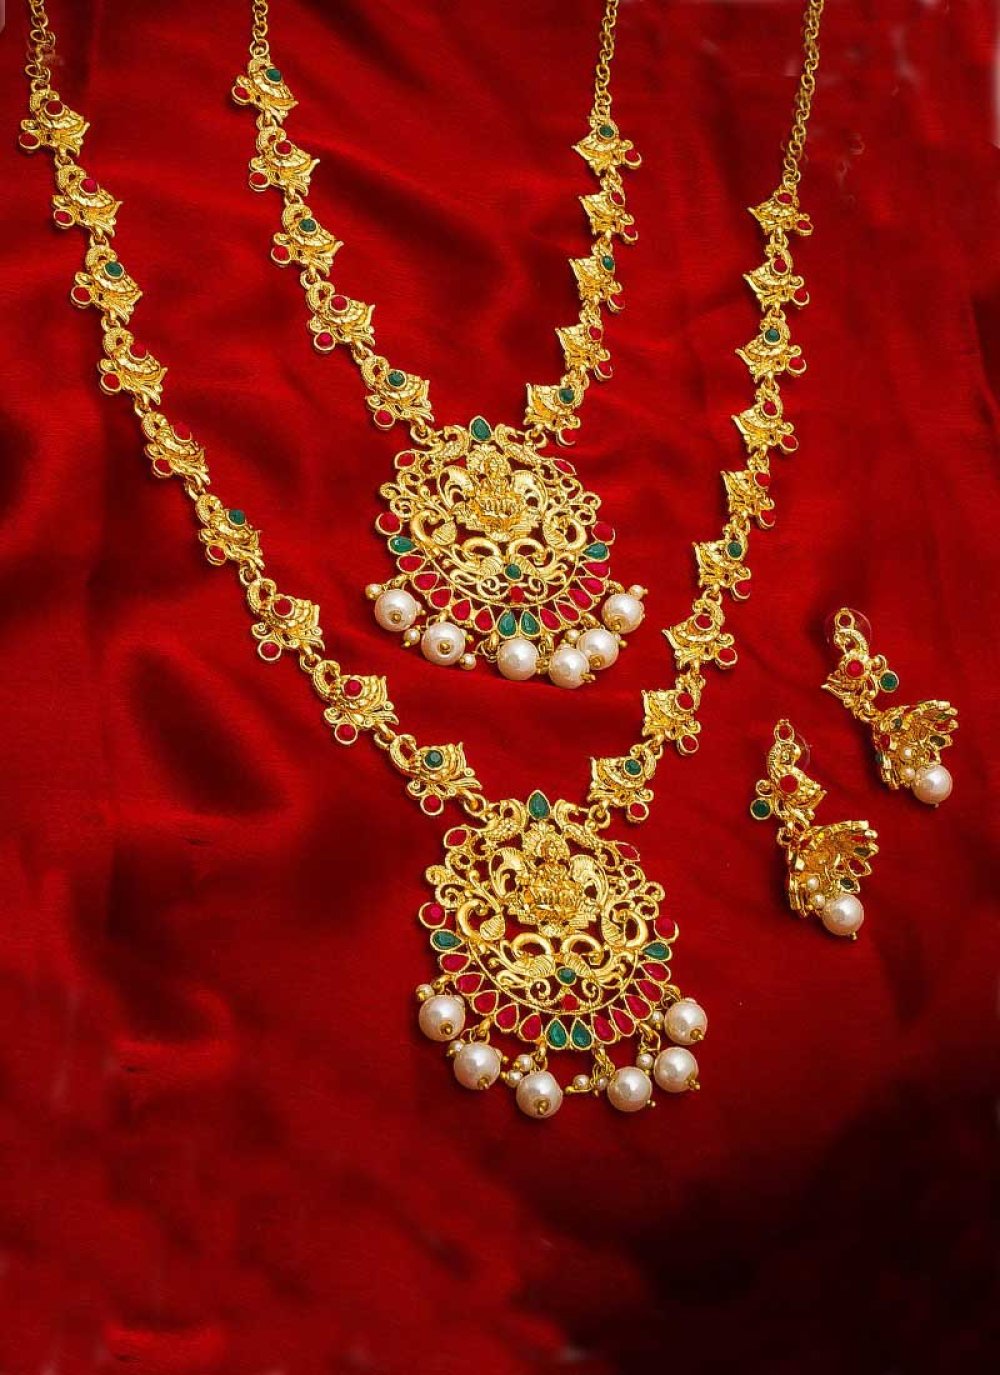 Attractive Gold and Green Stone Work Necklace Set For Bridal